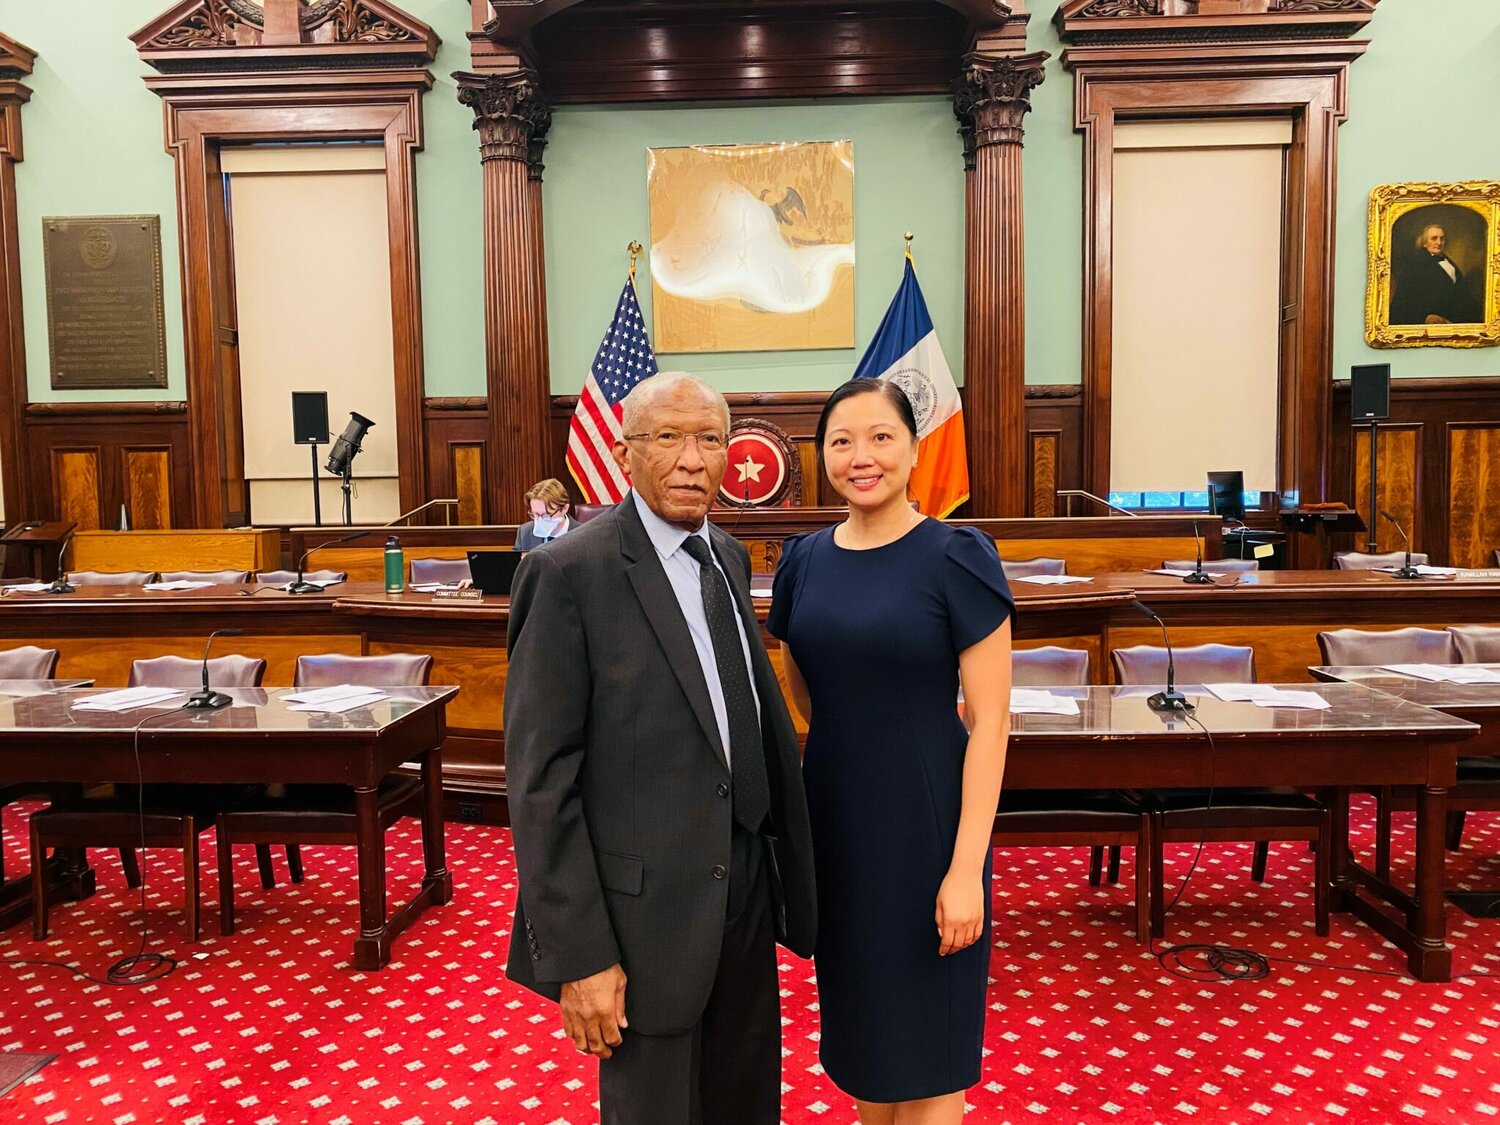 The Managerial Employees Association’s president, Darrell Sims, and its executive director,  Alice Wong, following their testimony on the municipal employee retention. The city announced last week that about 10,000 city managers would be getting raises, a long-sought MEA goal.